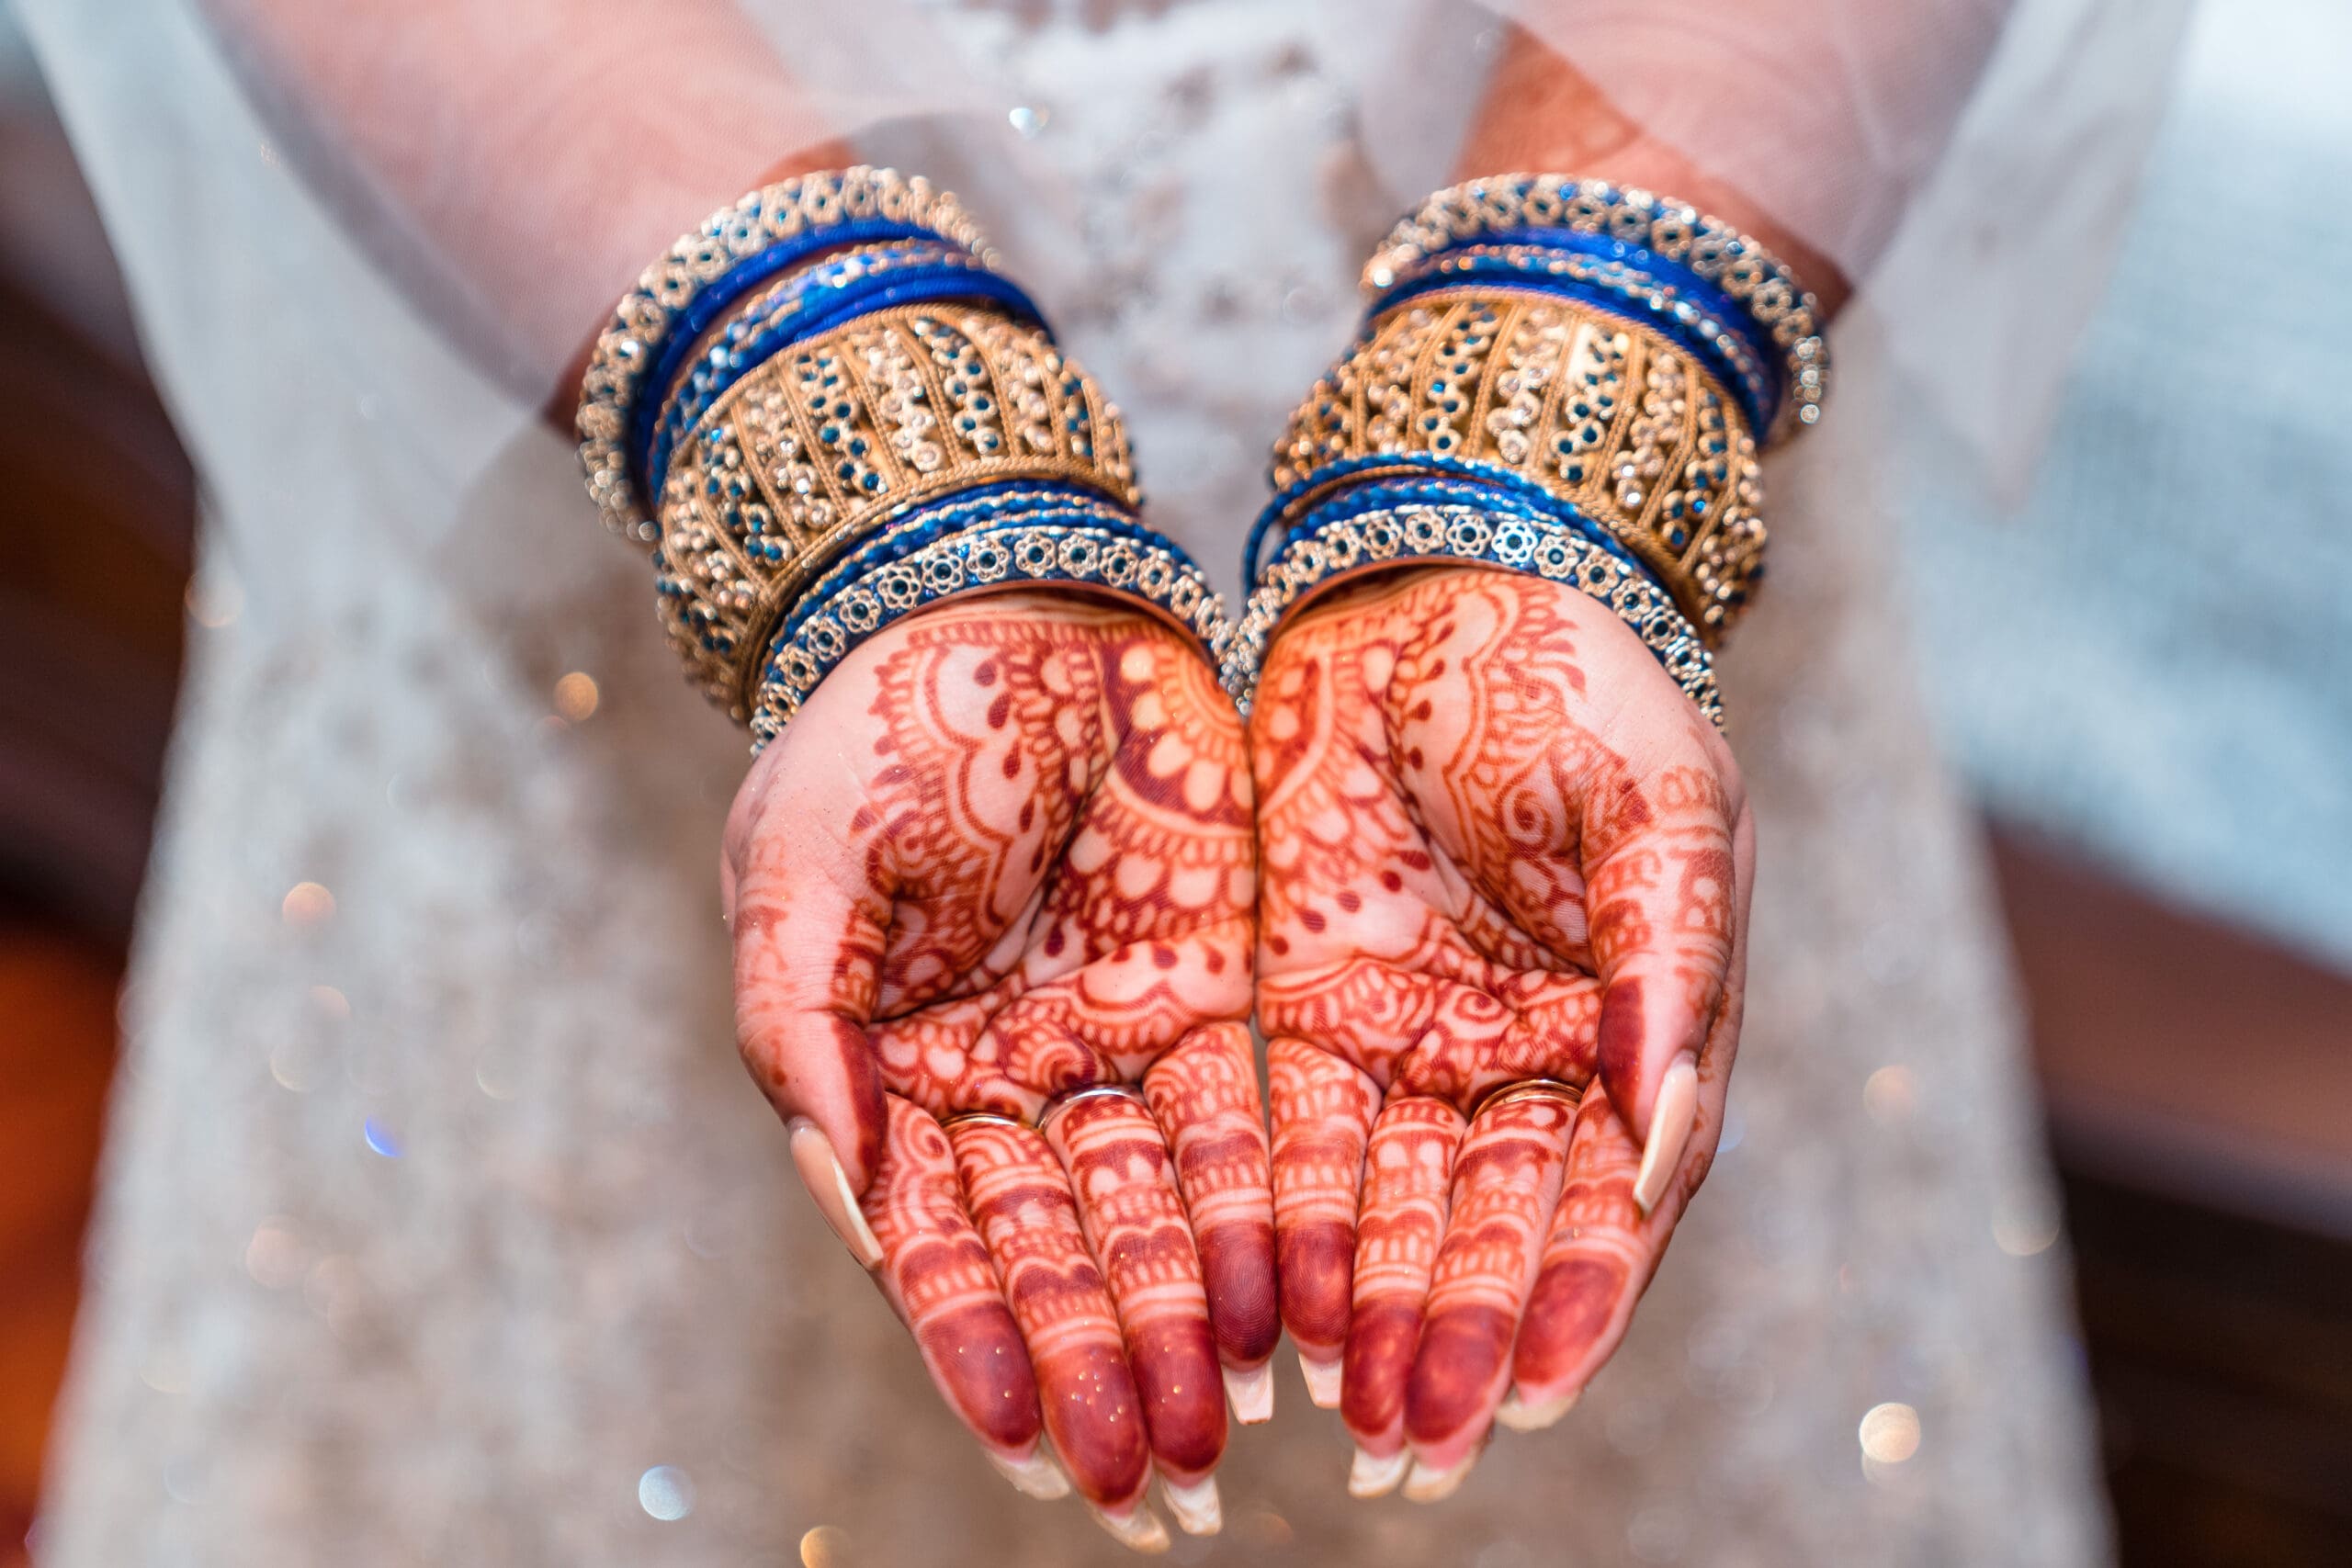 Close-up of bride's hands adorned with gold and blue bracelets, showcasing intricate henna tattoos, with a blurred white dress in the background.